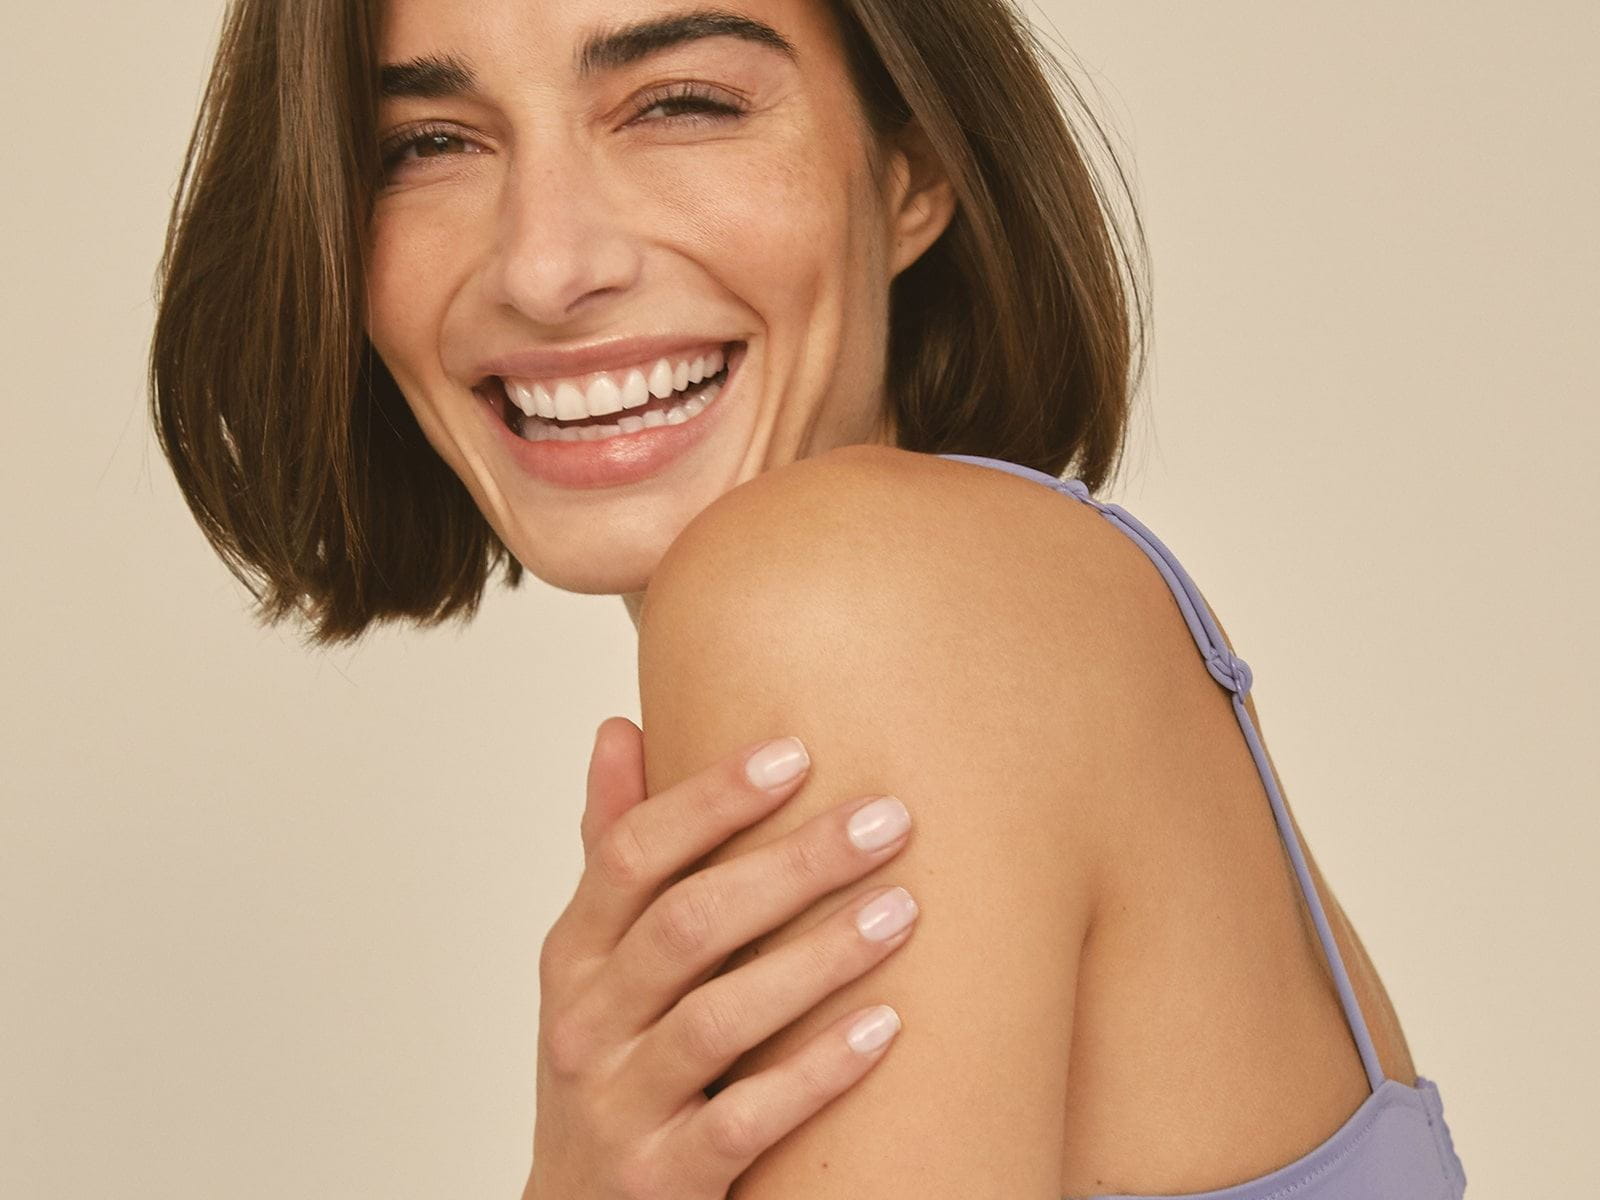 View of a person wearing a light coloured tank top while smiling and touching their left shoulder.